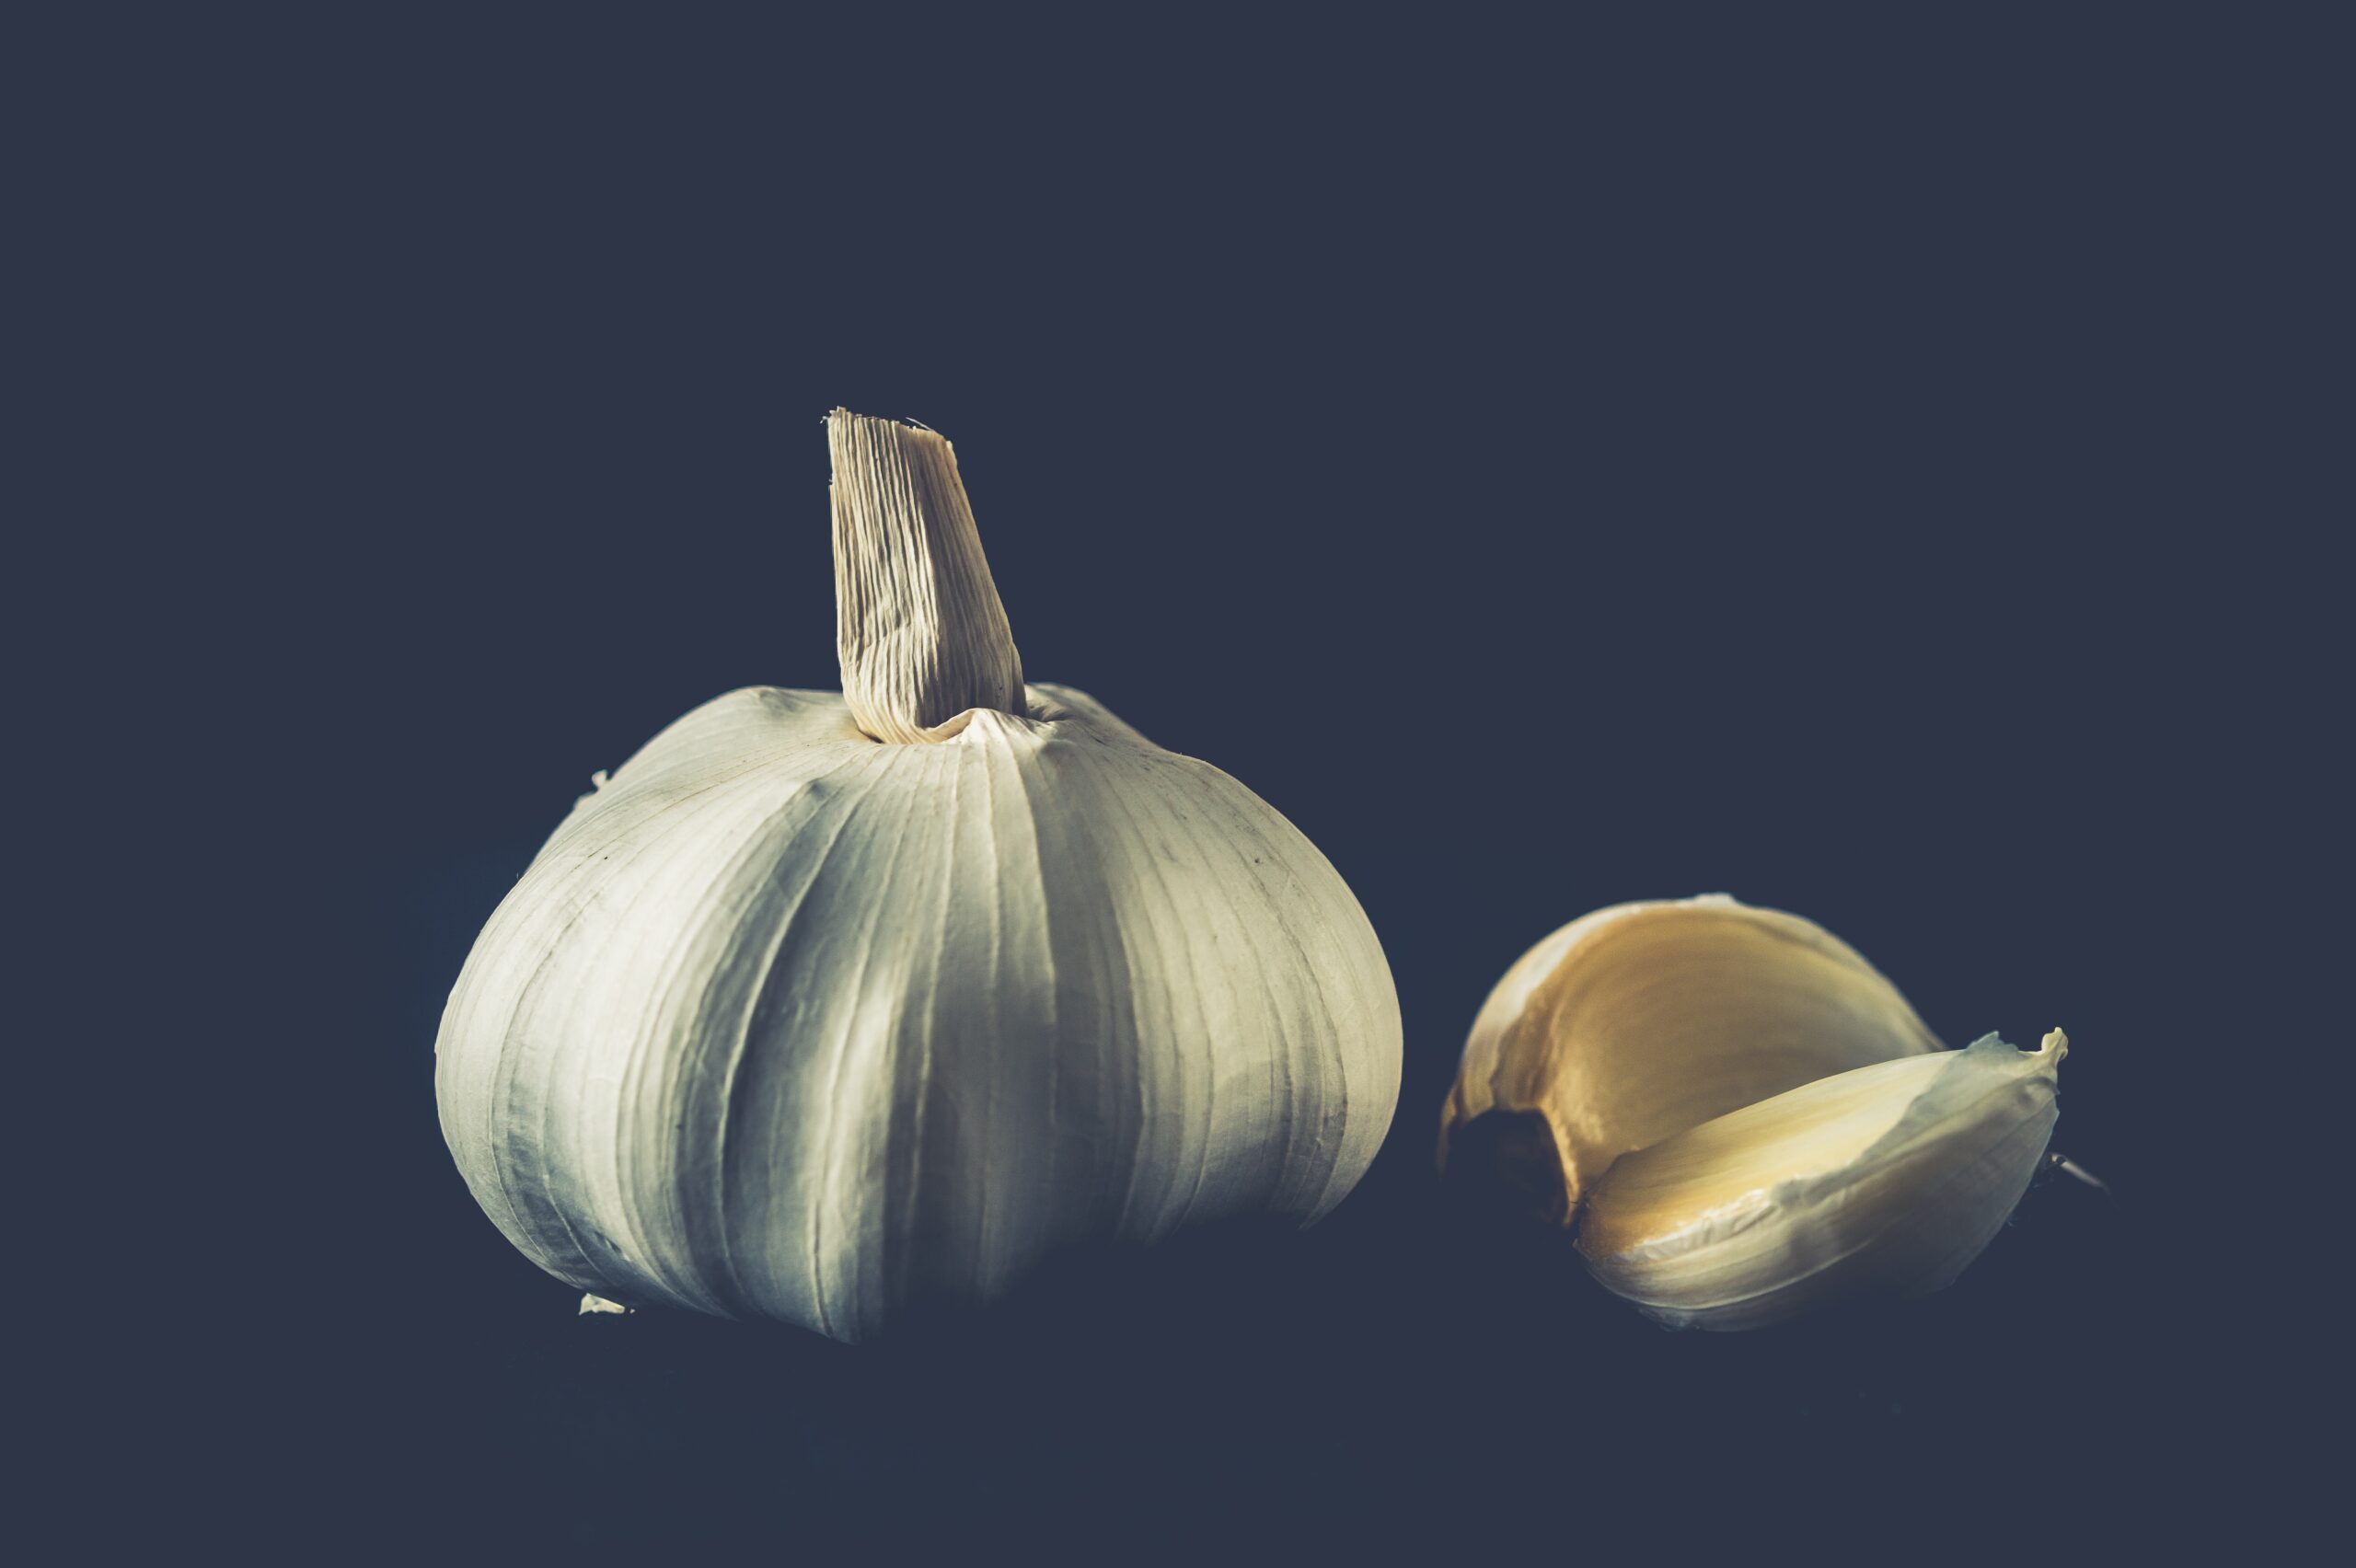 a bulb of garlic and 2 cloves on a black background